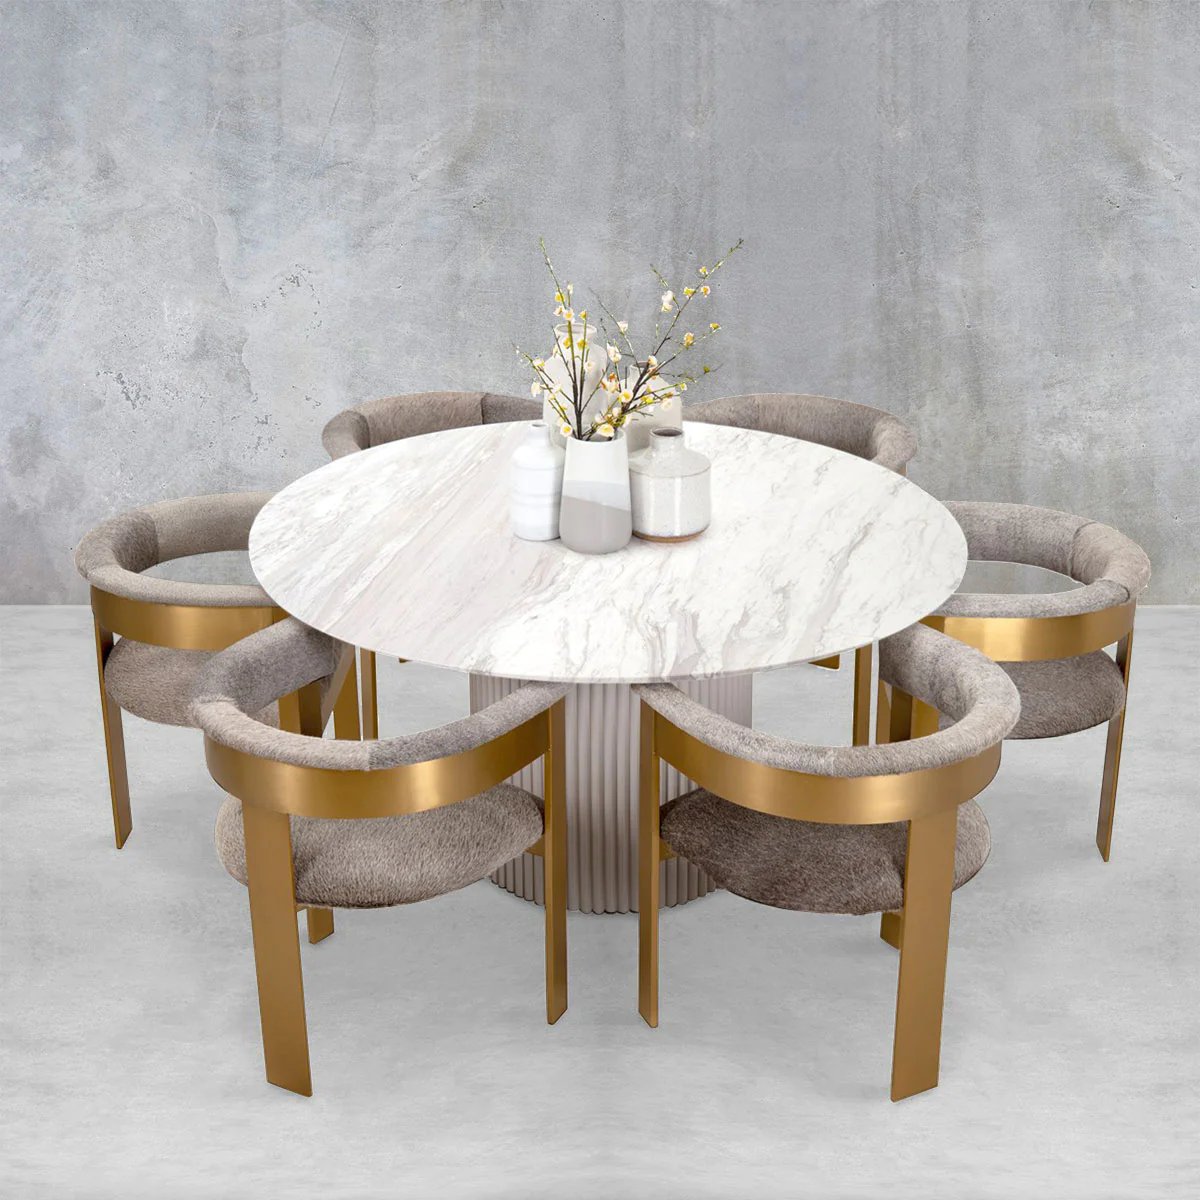 How To Make A Marble Dining Table